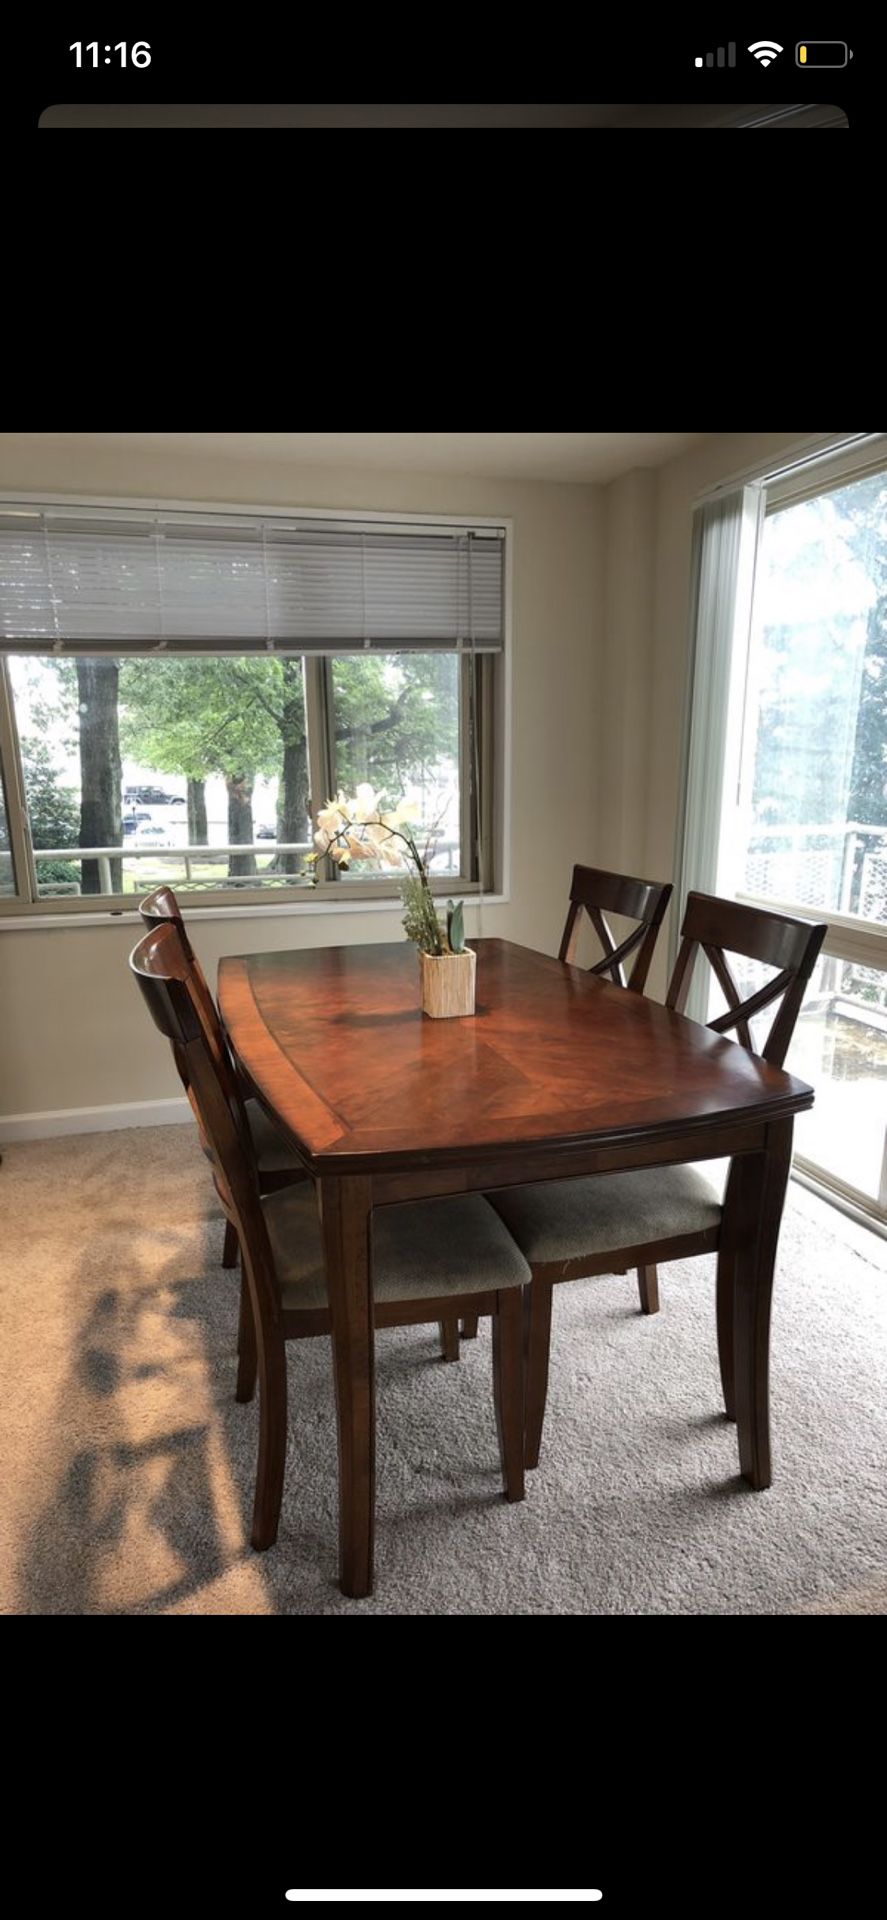 Mahogany wood table with 4 chairs